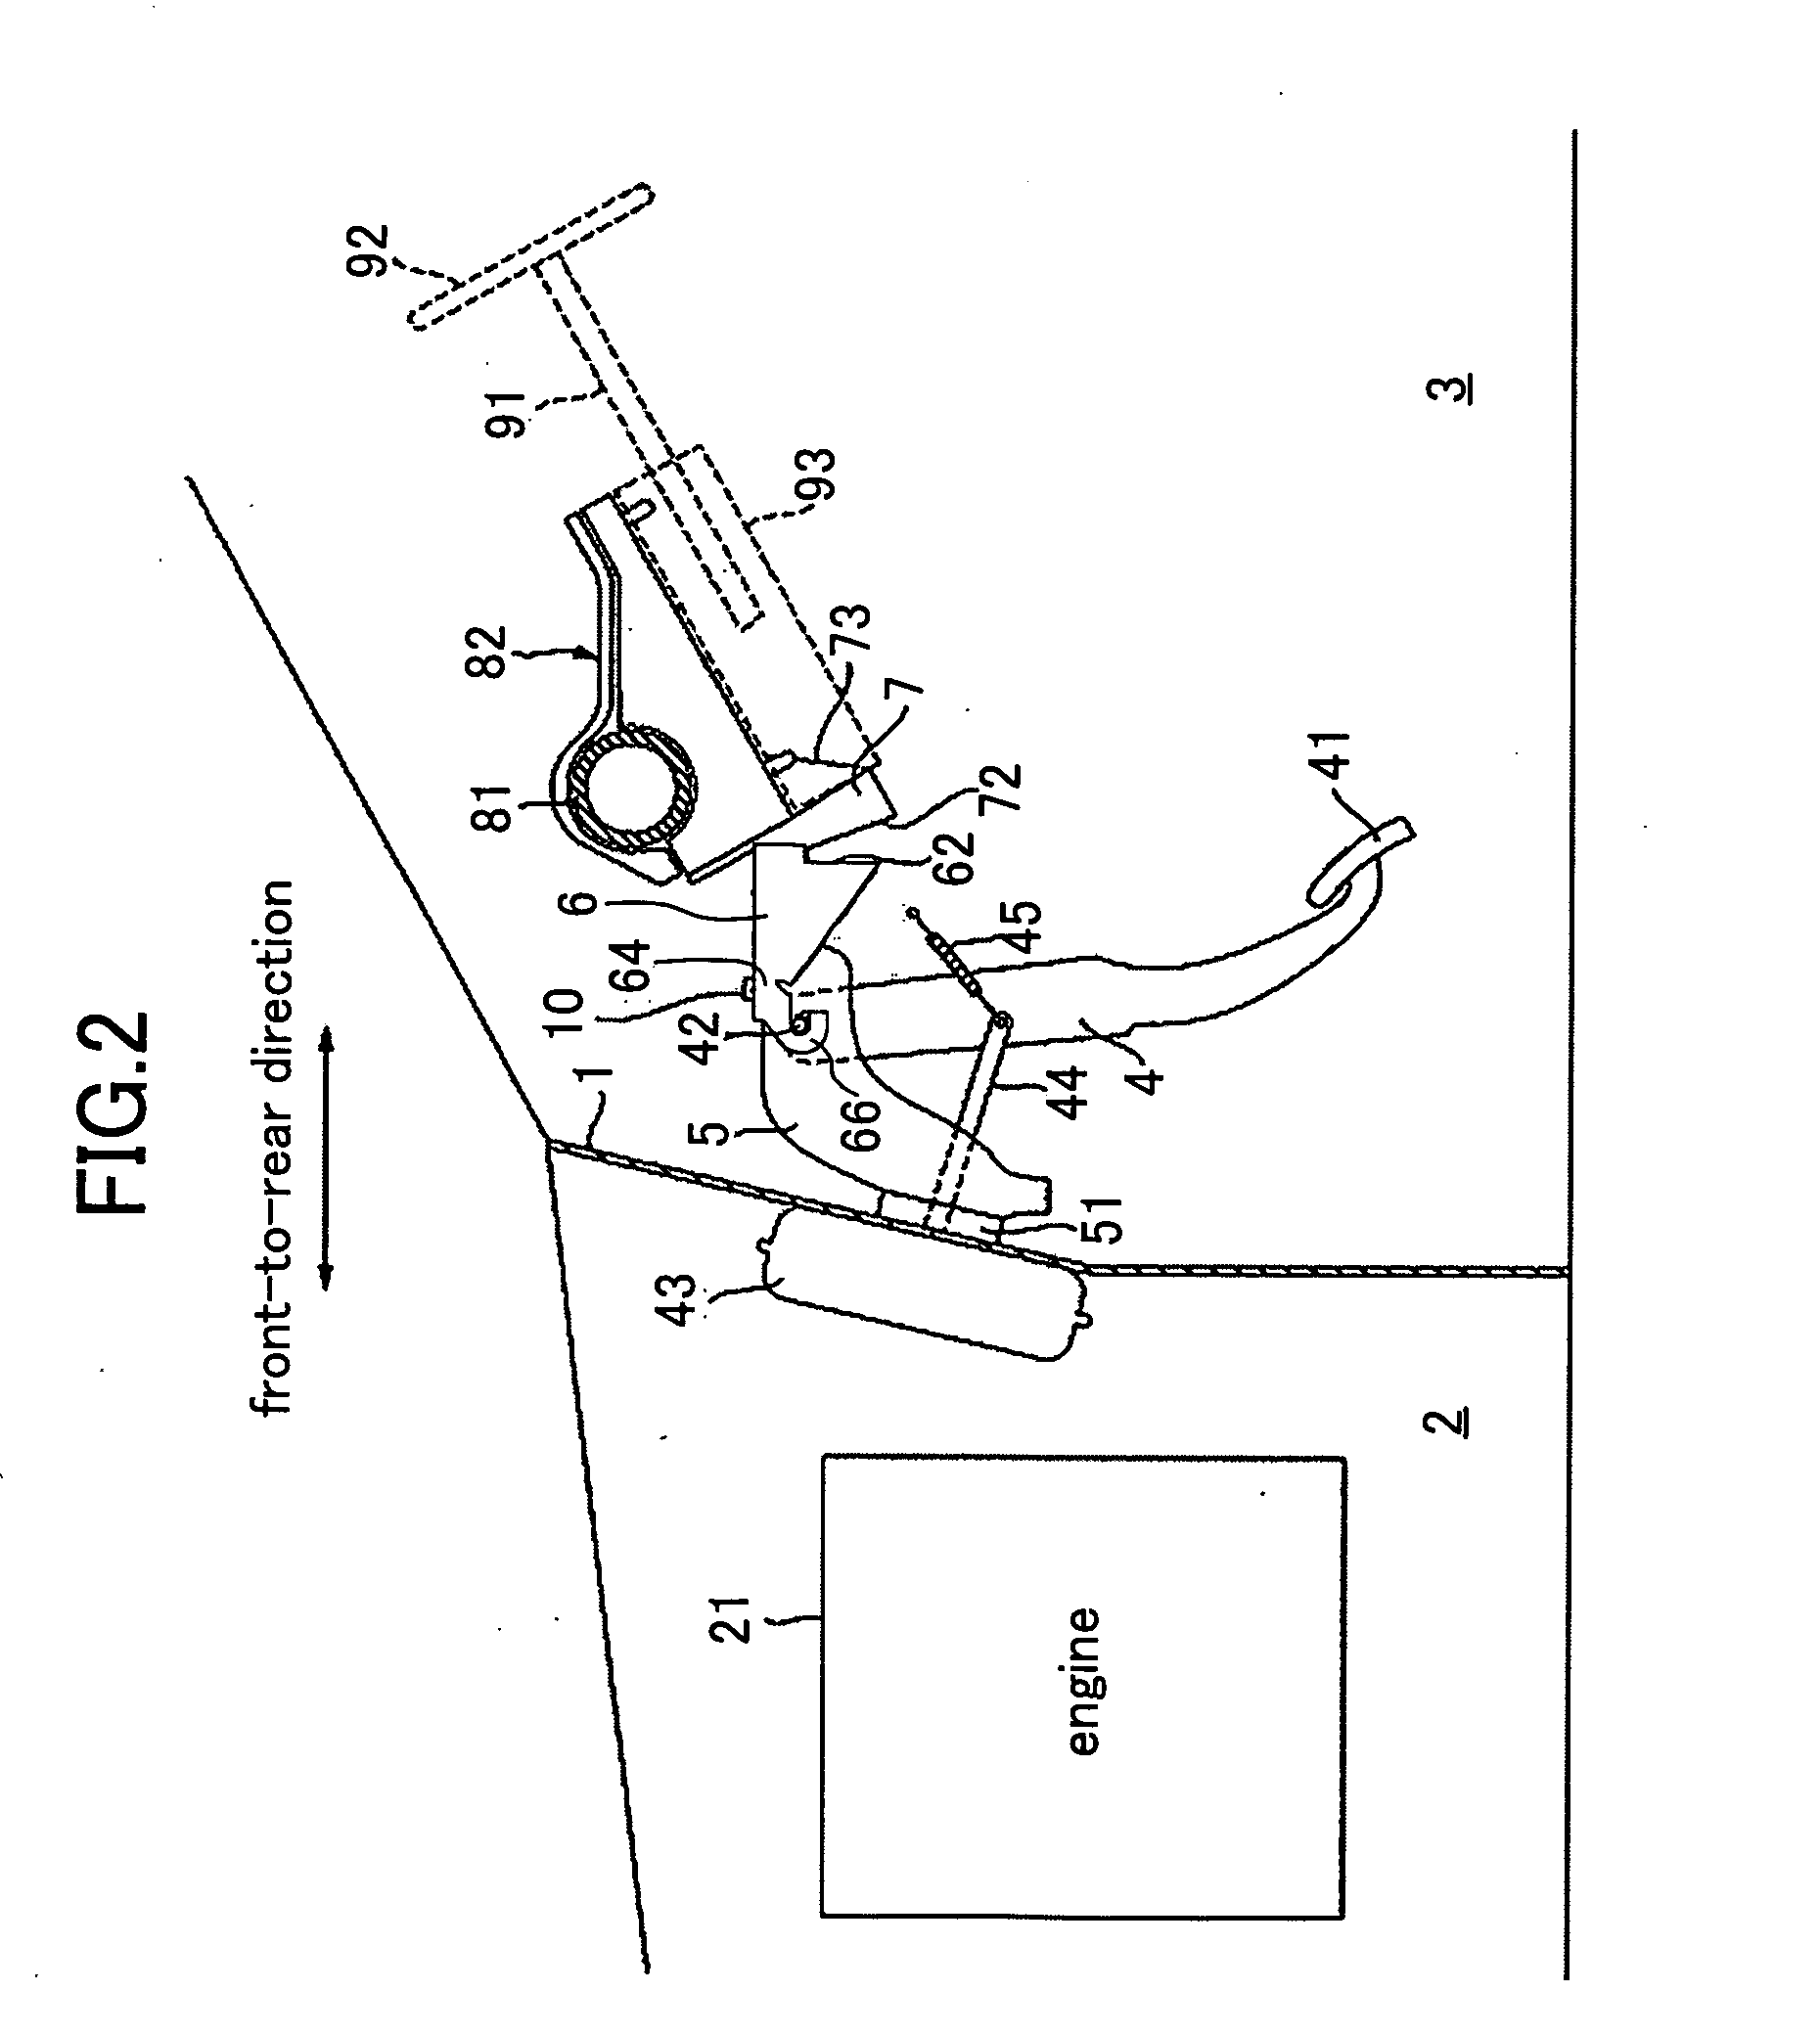 Pedal assembly support structure for vehicle